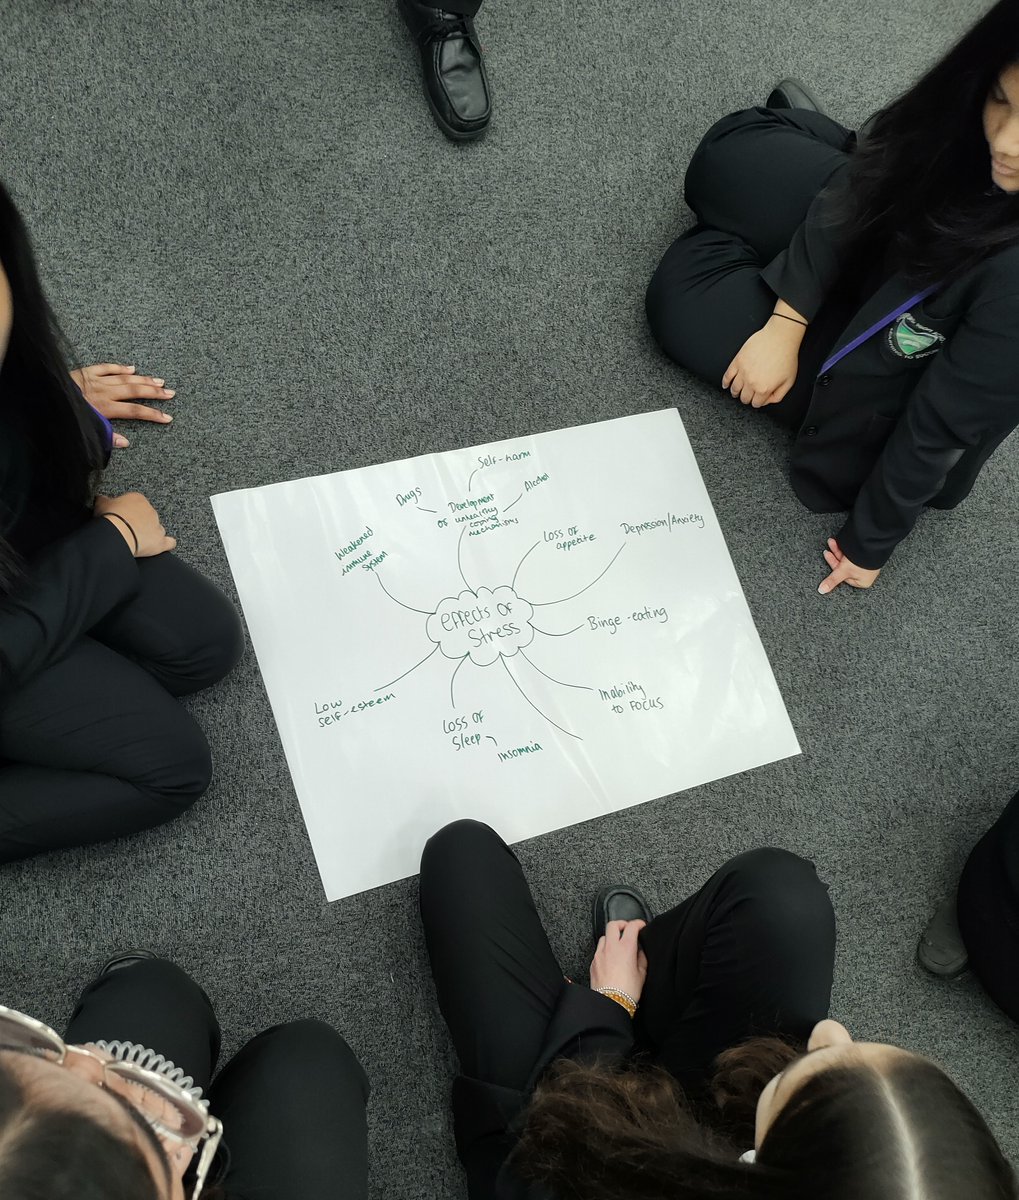 With Year 11 exams fast approaching, Ms. Adhami and our clinical psychologist Sarika are running workshops for this cohort, designed to help them manage their stress.
#learningtosucceed #stressmanagement #greenfordhighschool